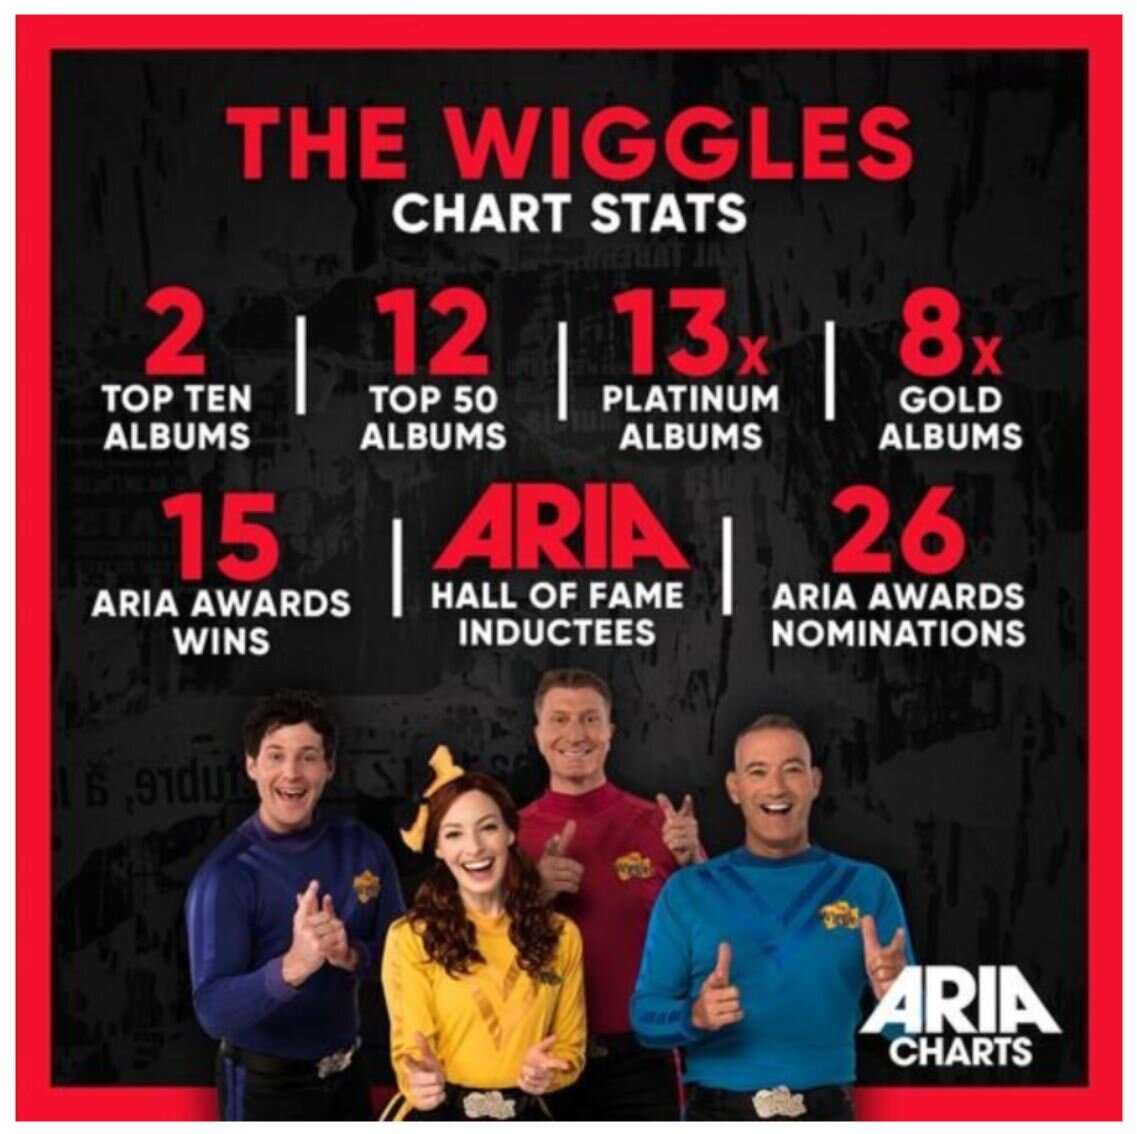 The Wiggles Awards Recognitions And Achievements — The Wiggles